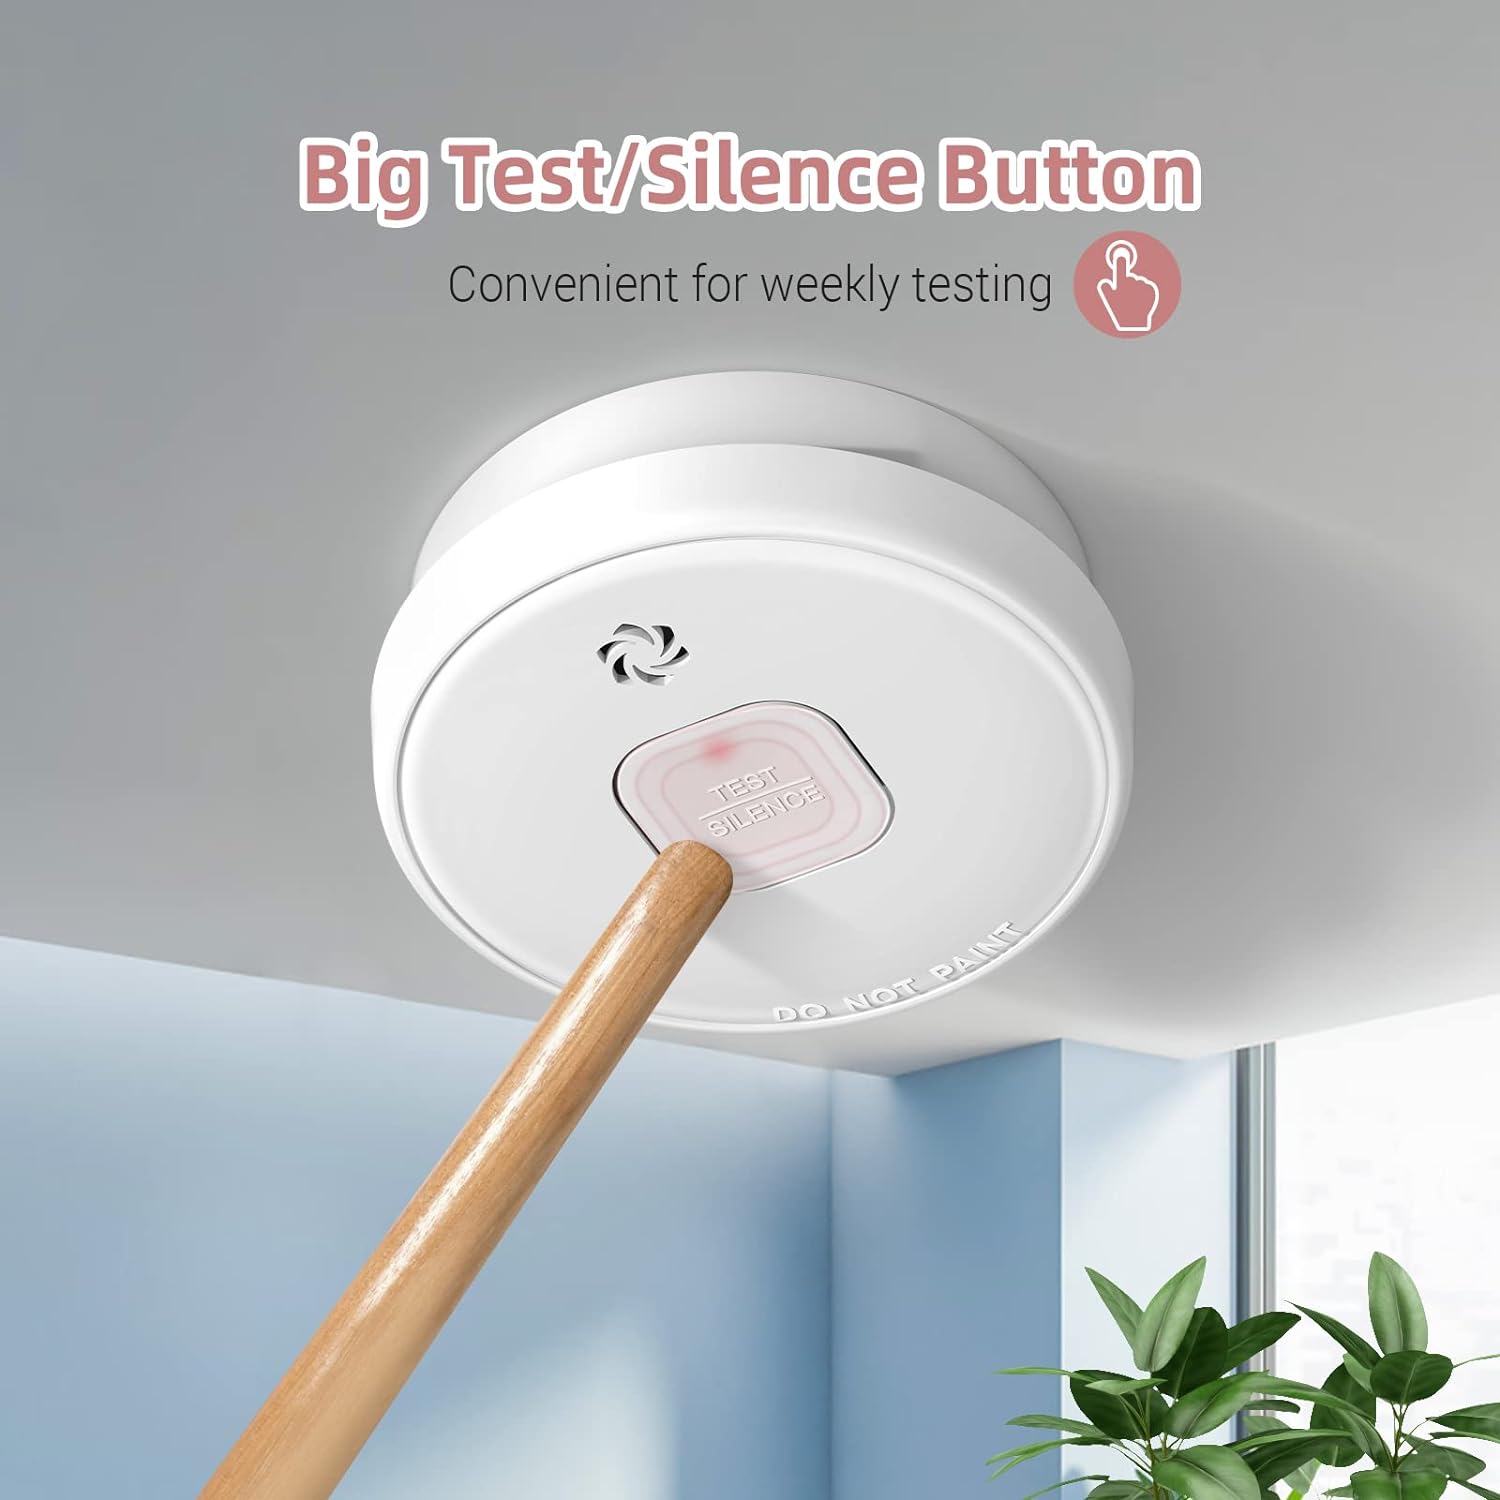 SITERWELL ELECTRONICS CO.,LIMI Putogesafe Smoke Detector, 10-Year Smoke Alarm with Photoelectric Sensor and Built-in 3V Lithum Battery, Fire Alarm with Test B